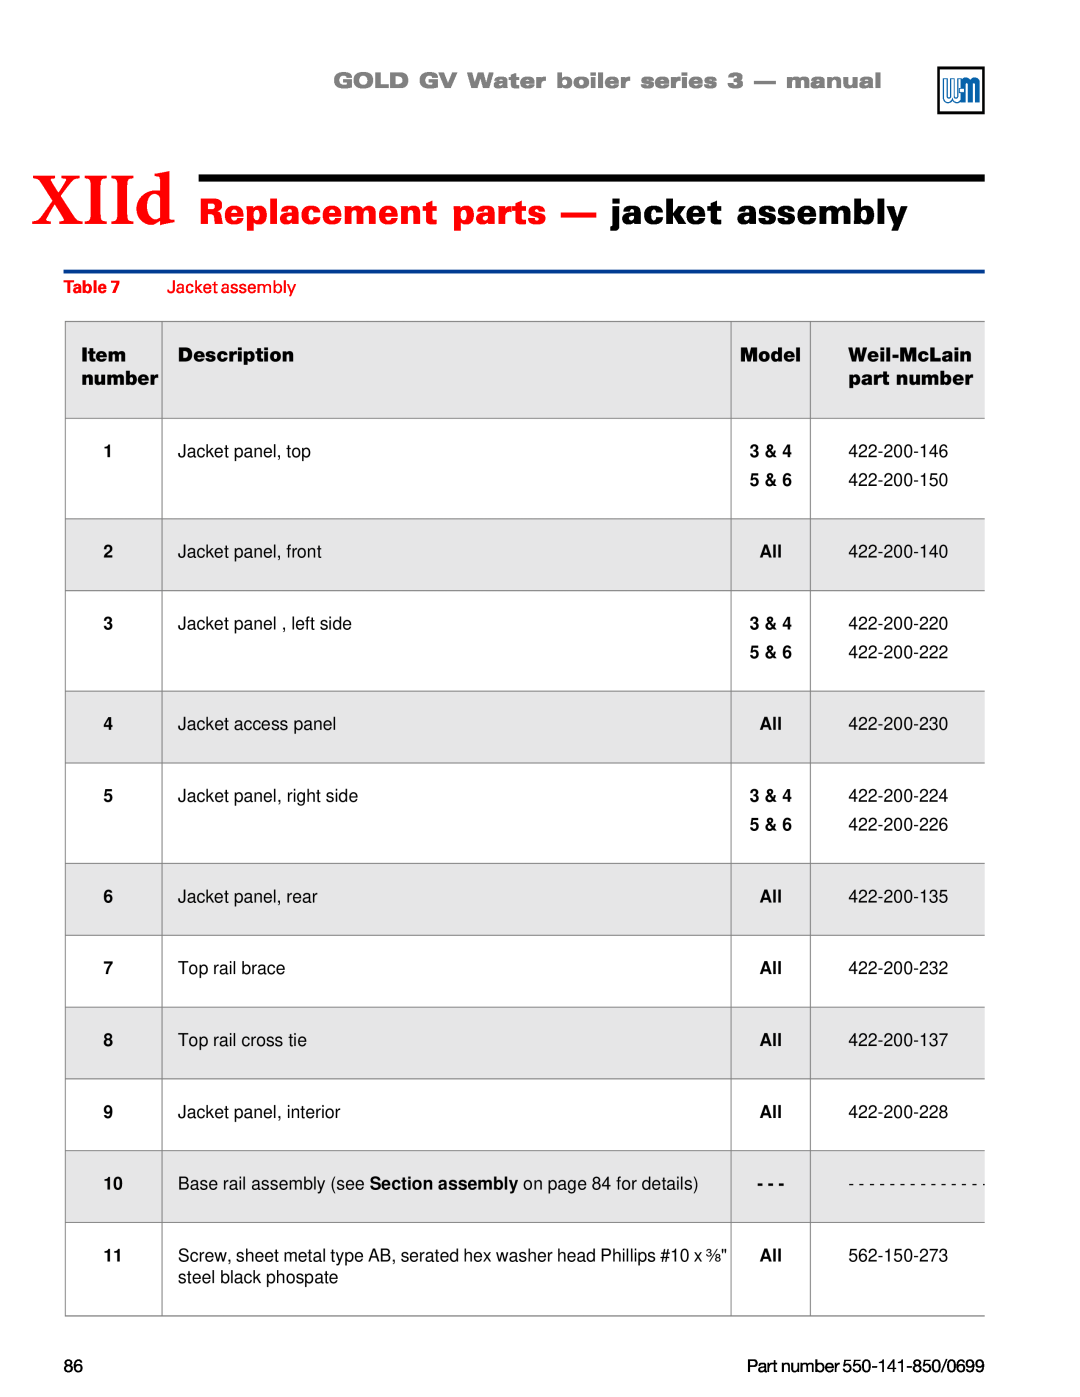 Weil-McLain GOLD DV WATER BOILER XIId Replacement parts - jacket assembly, GOLD GV Water boiler series 3 — manual, Item 